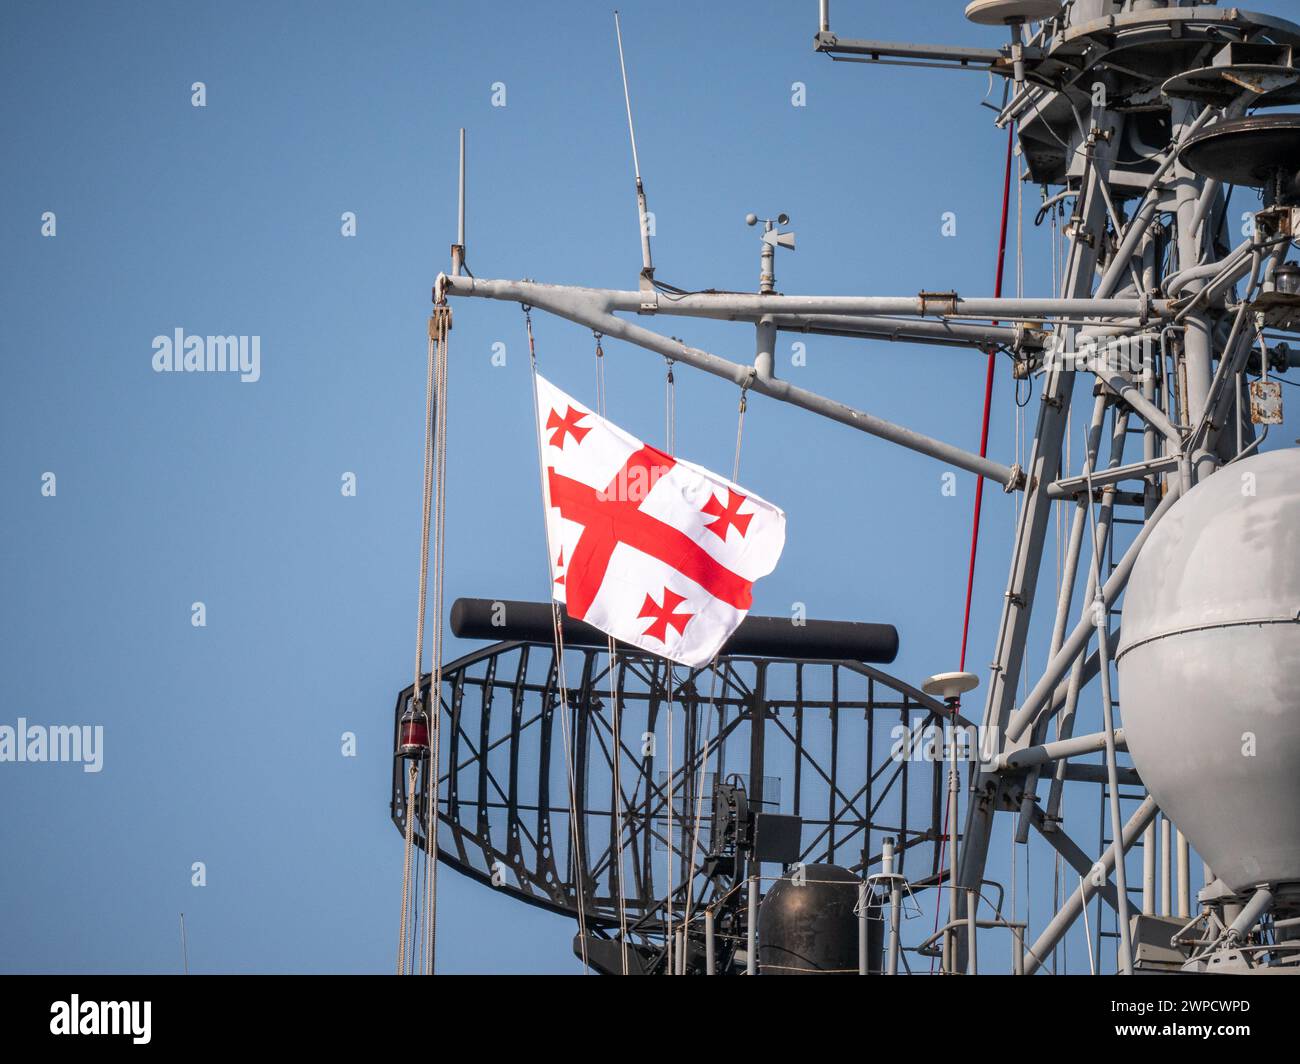 Georgian flag fluttering on naval ship radar tower, with intricate communication equipment against blue sky Stock Photo